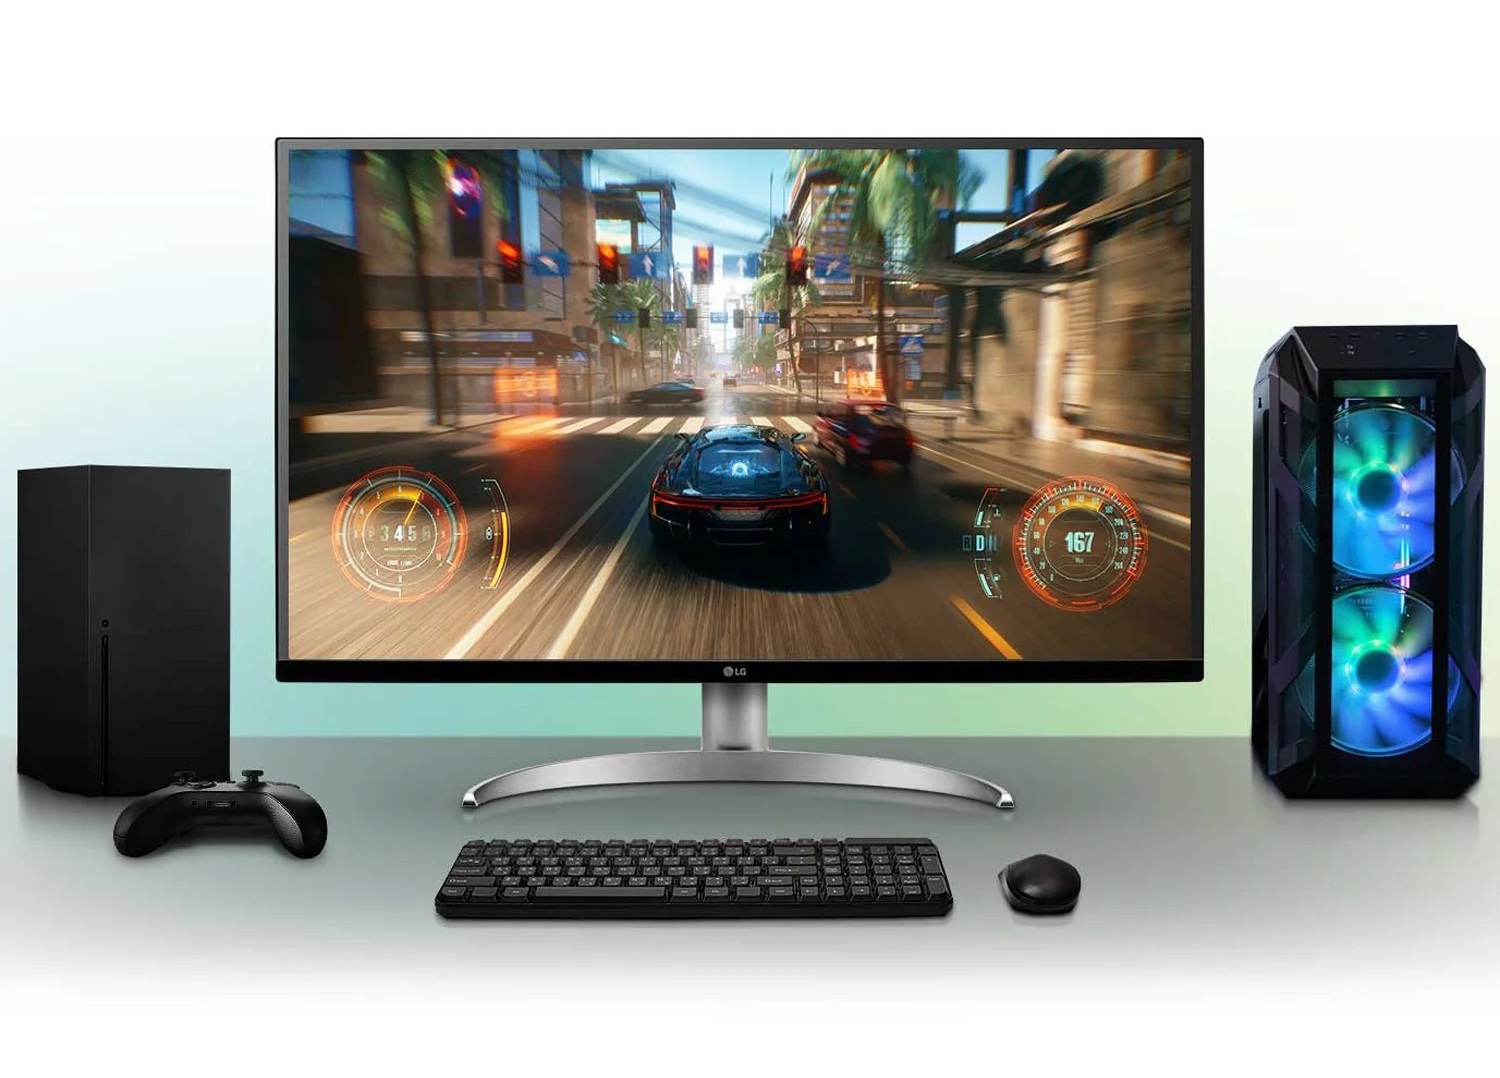 LG 32UQ750-W 4K gaming monitor with 144 Hz refresh rate and HDMI 